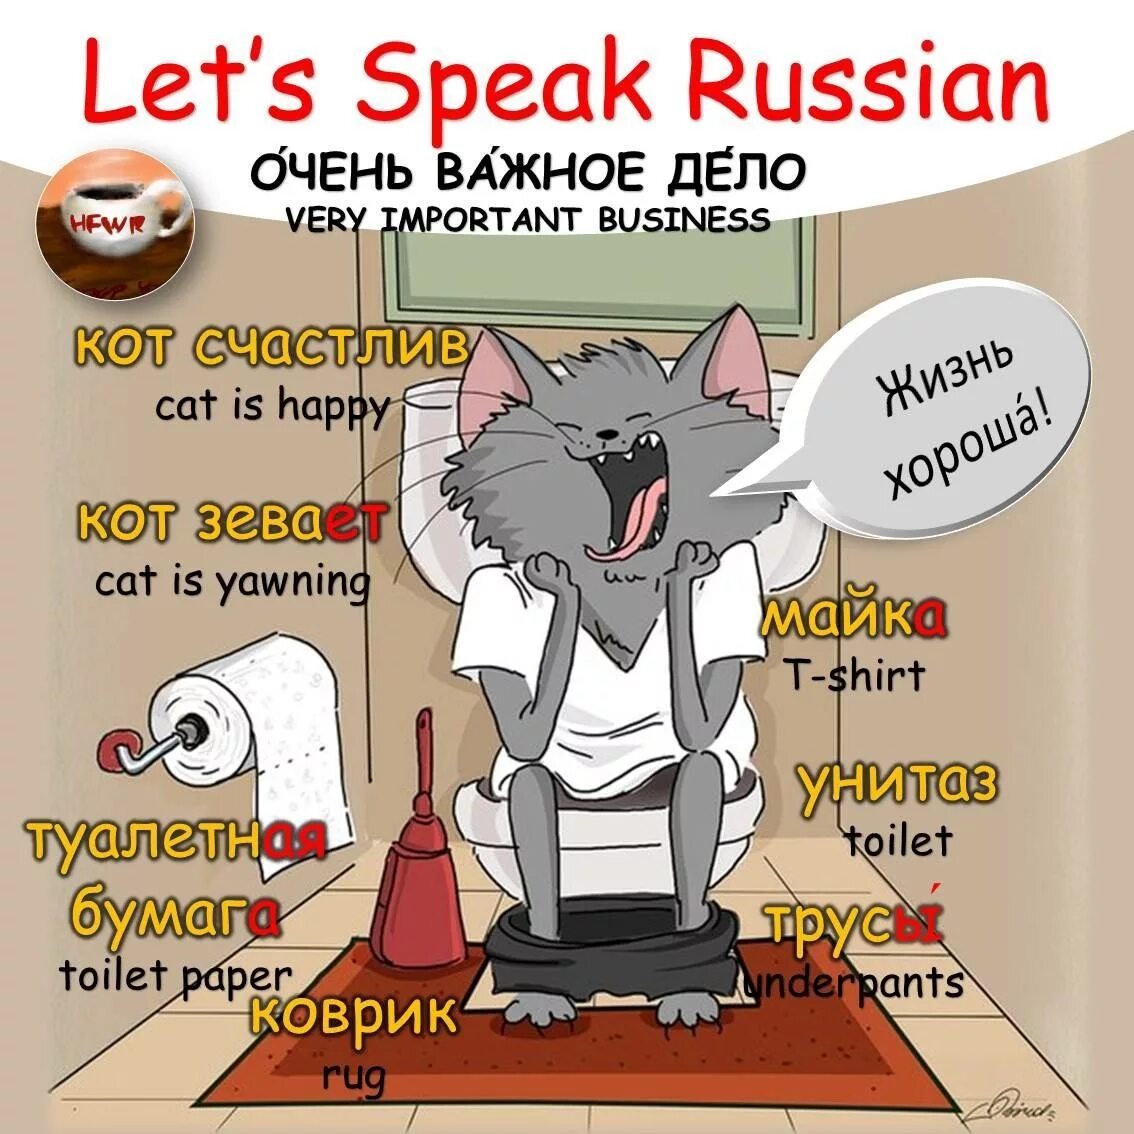 How to speak russian. Funny Russian language. Russian language jokes. Speak Russian. How speak Russian.